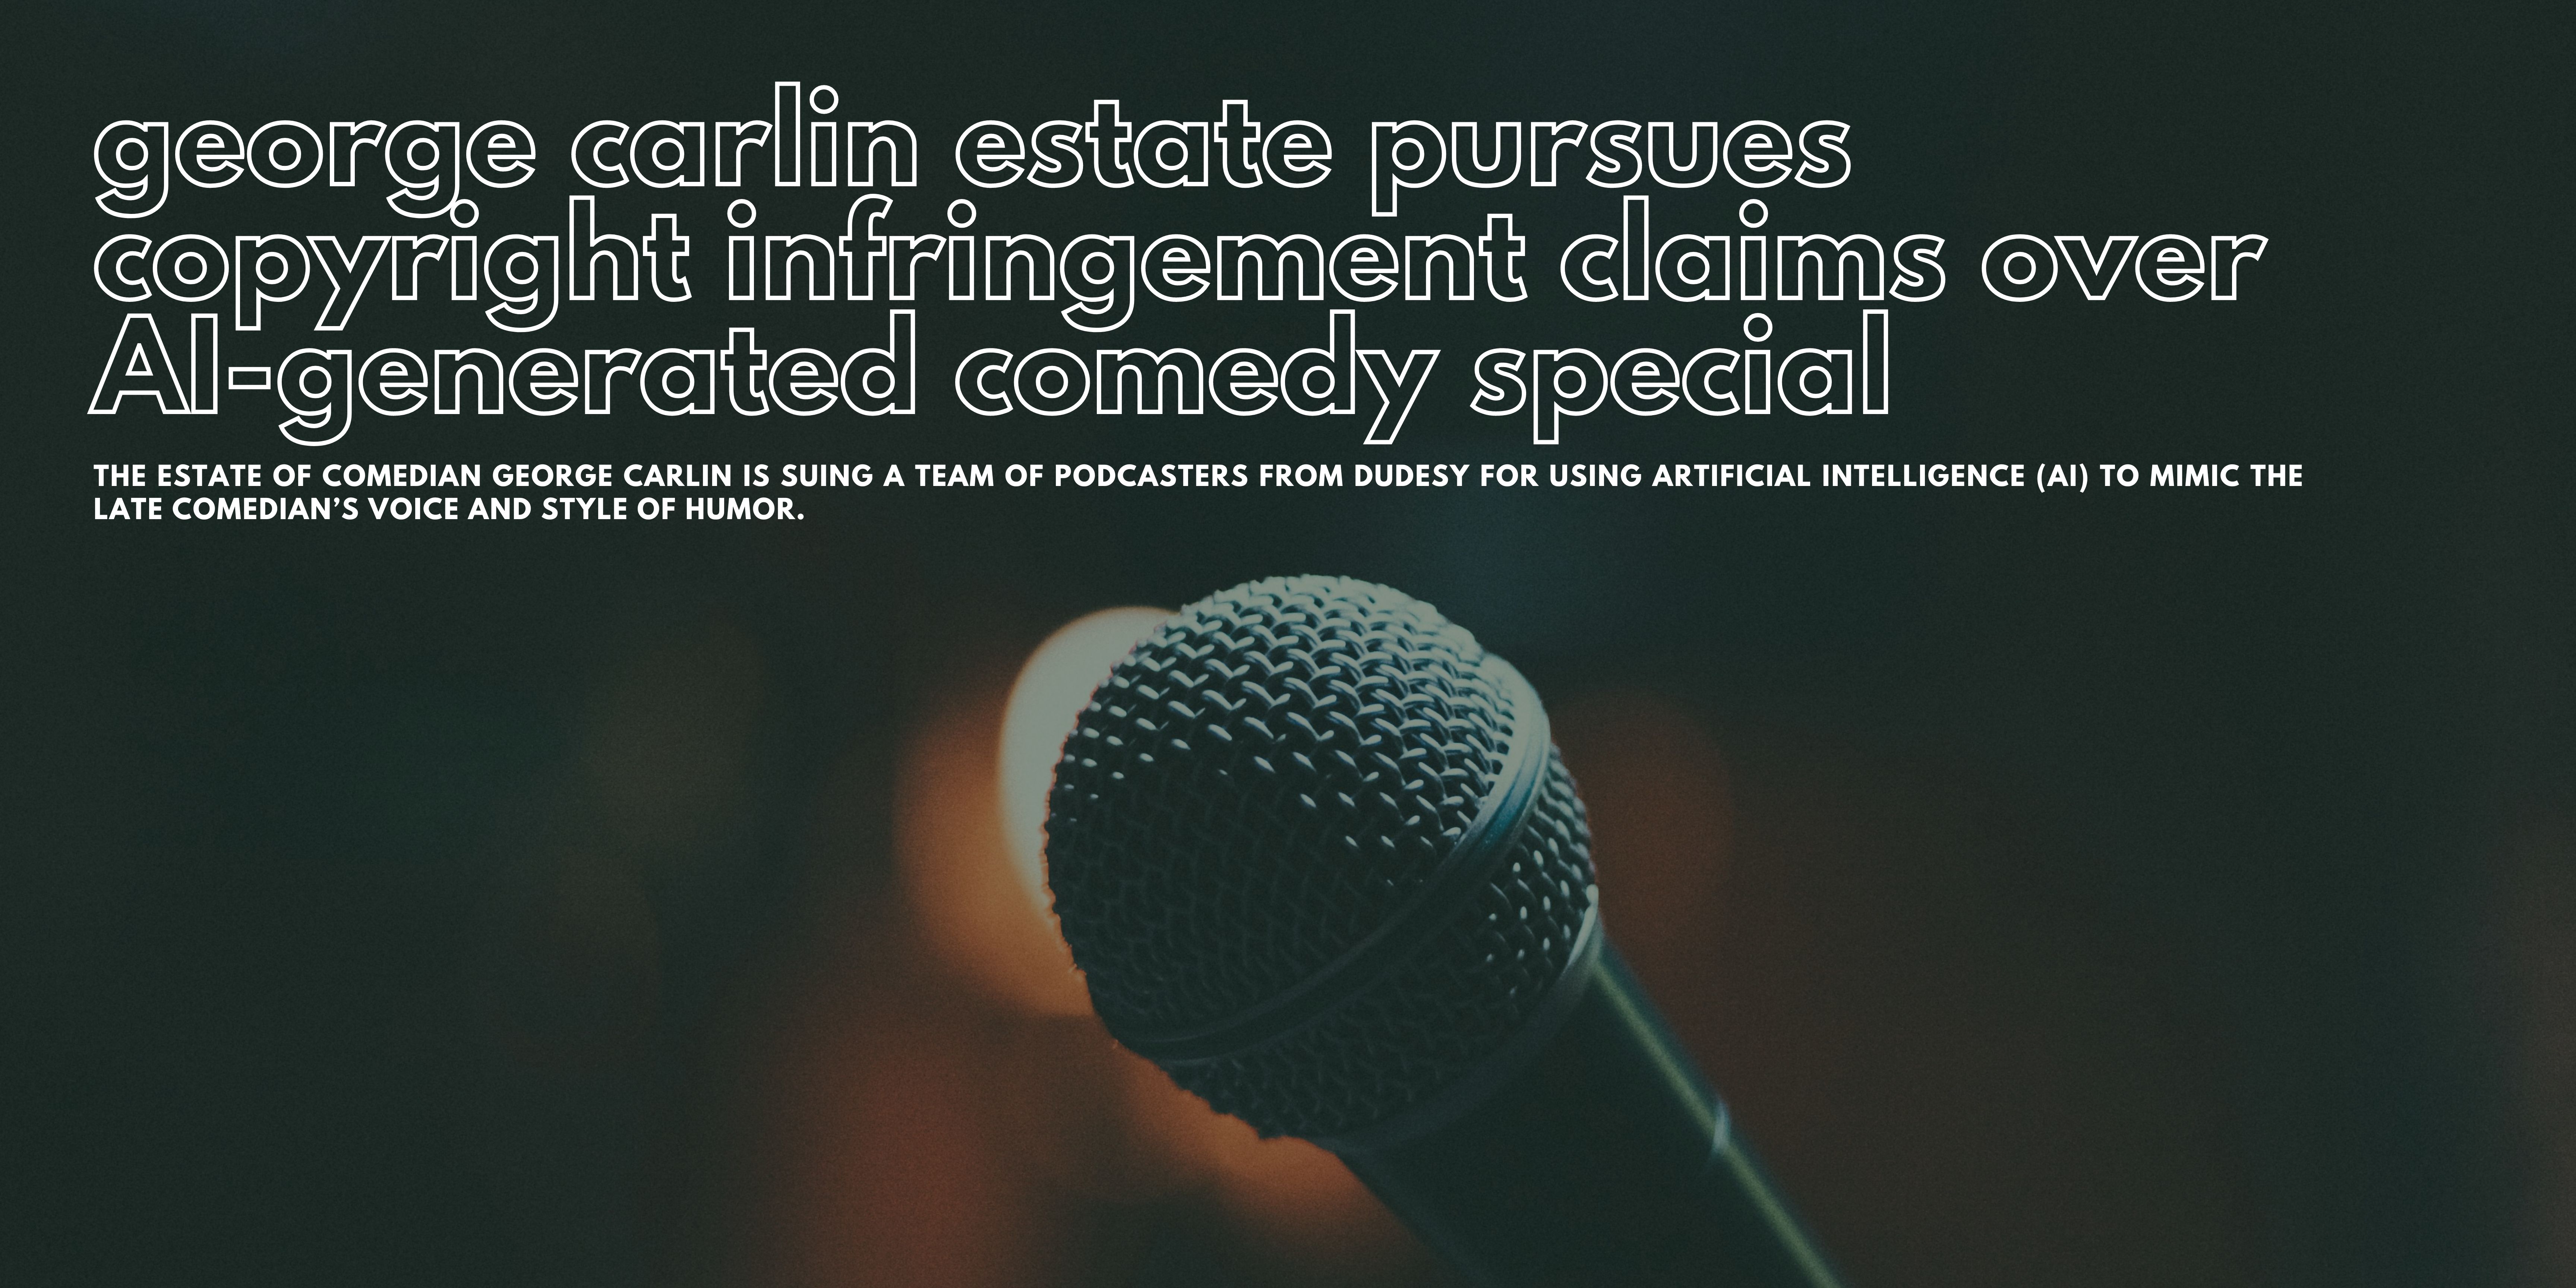 George Carlin Estate Pursues Copyright Infringement Claims Over AI-Generated Comedy Special